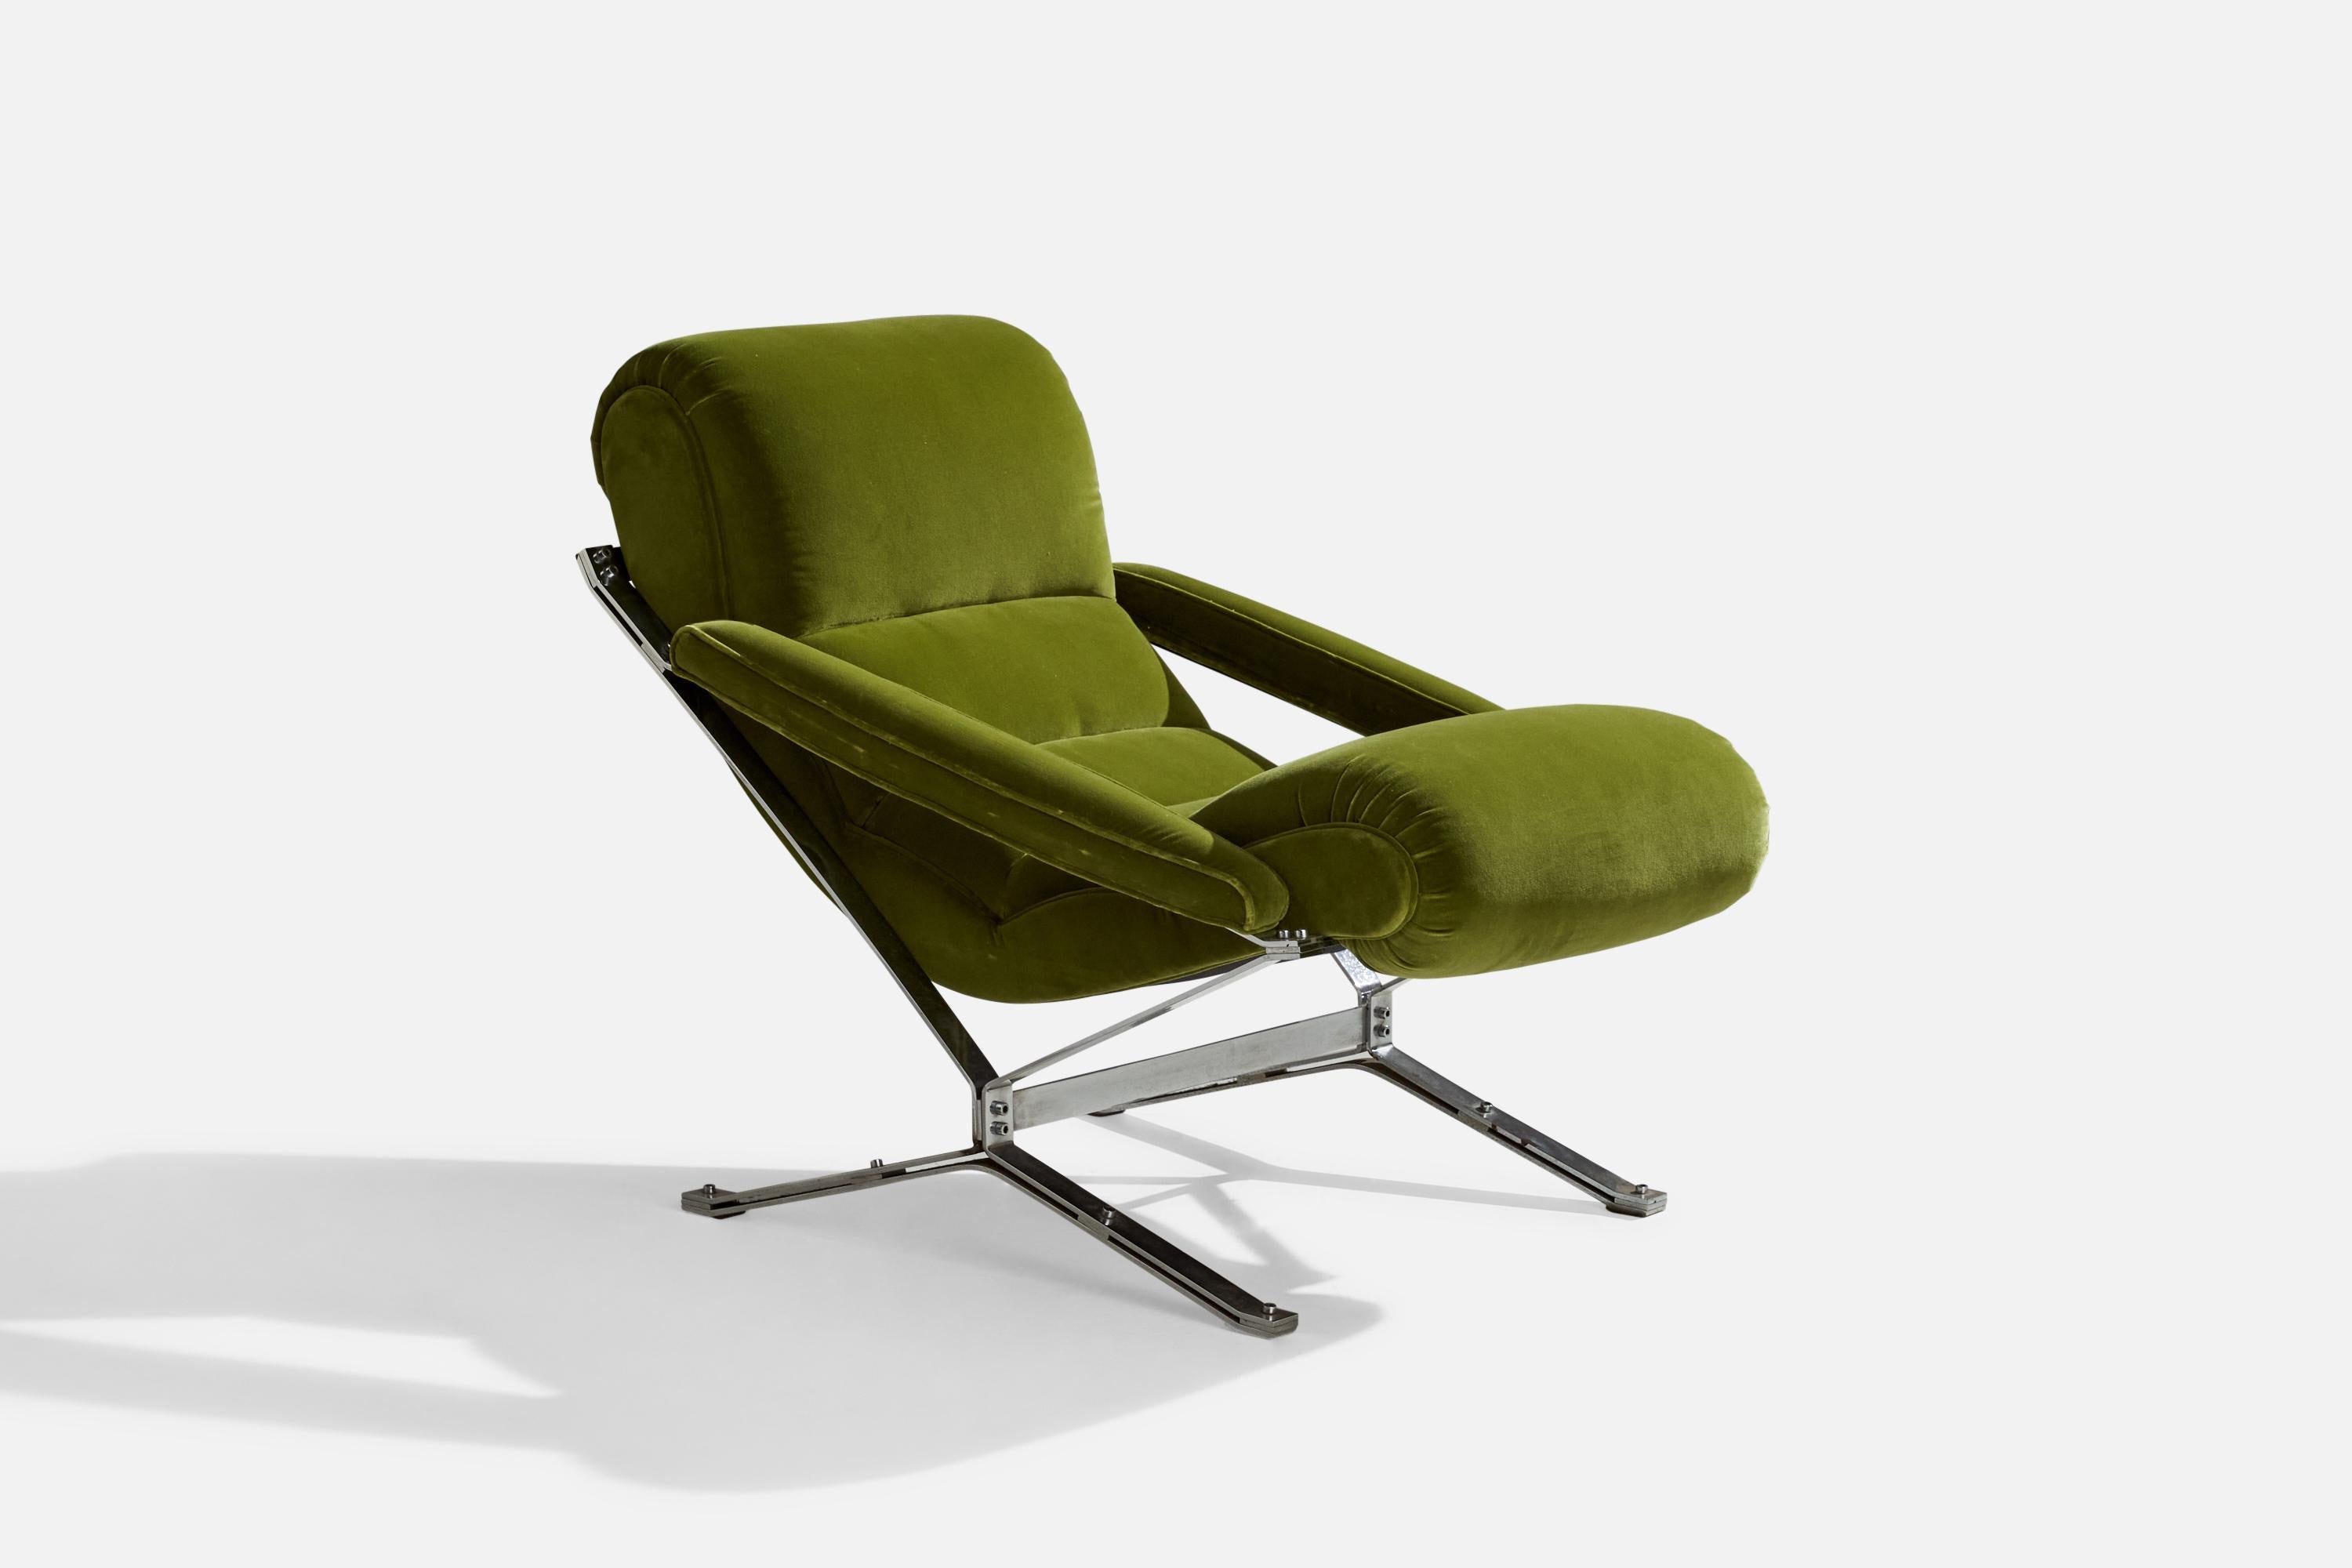 A metal and green velvet rocking chair designed and produced by Giulio Moscatelli, Italy, c. 1960s.

seat height 21”.
